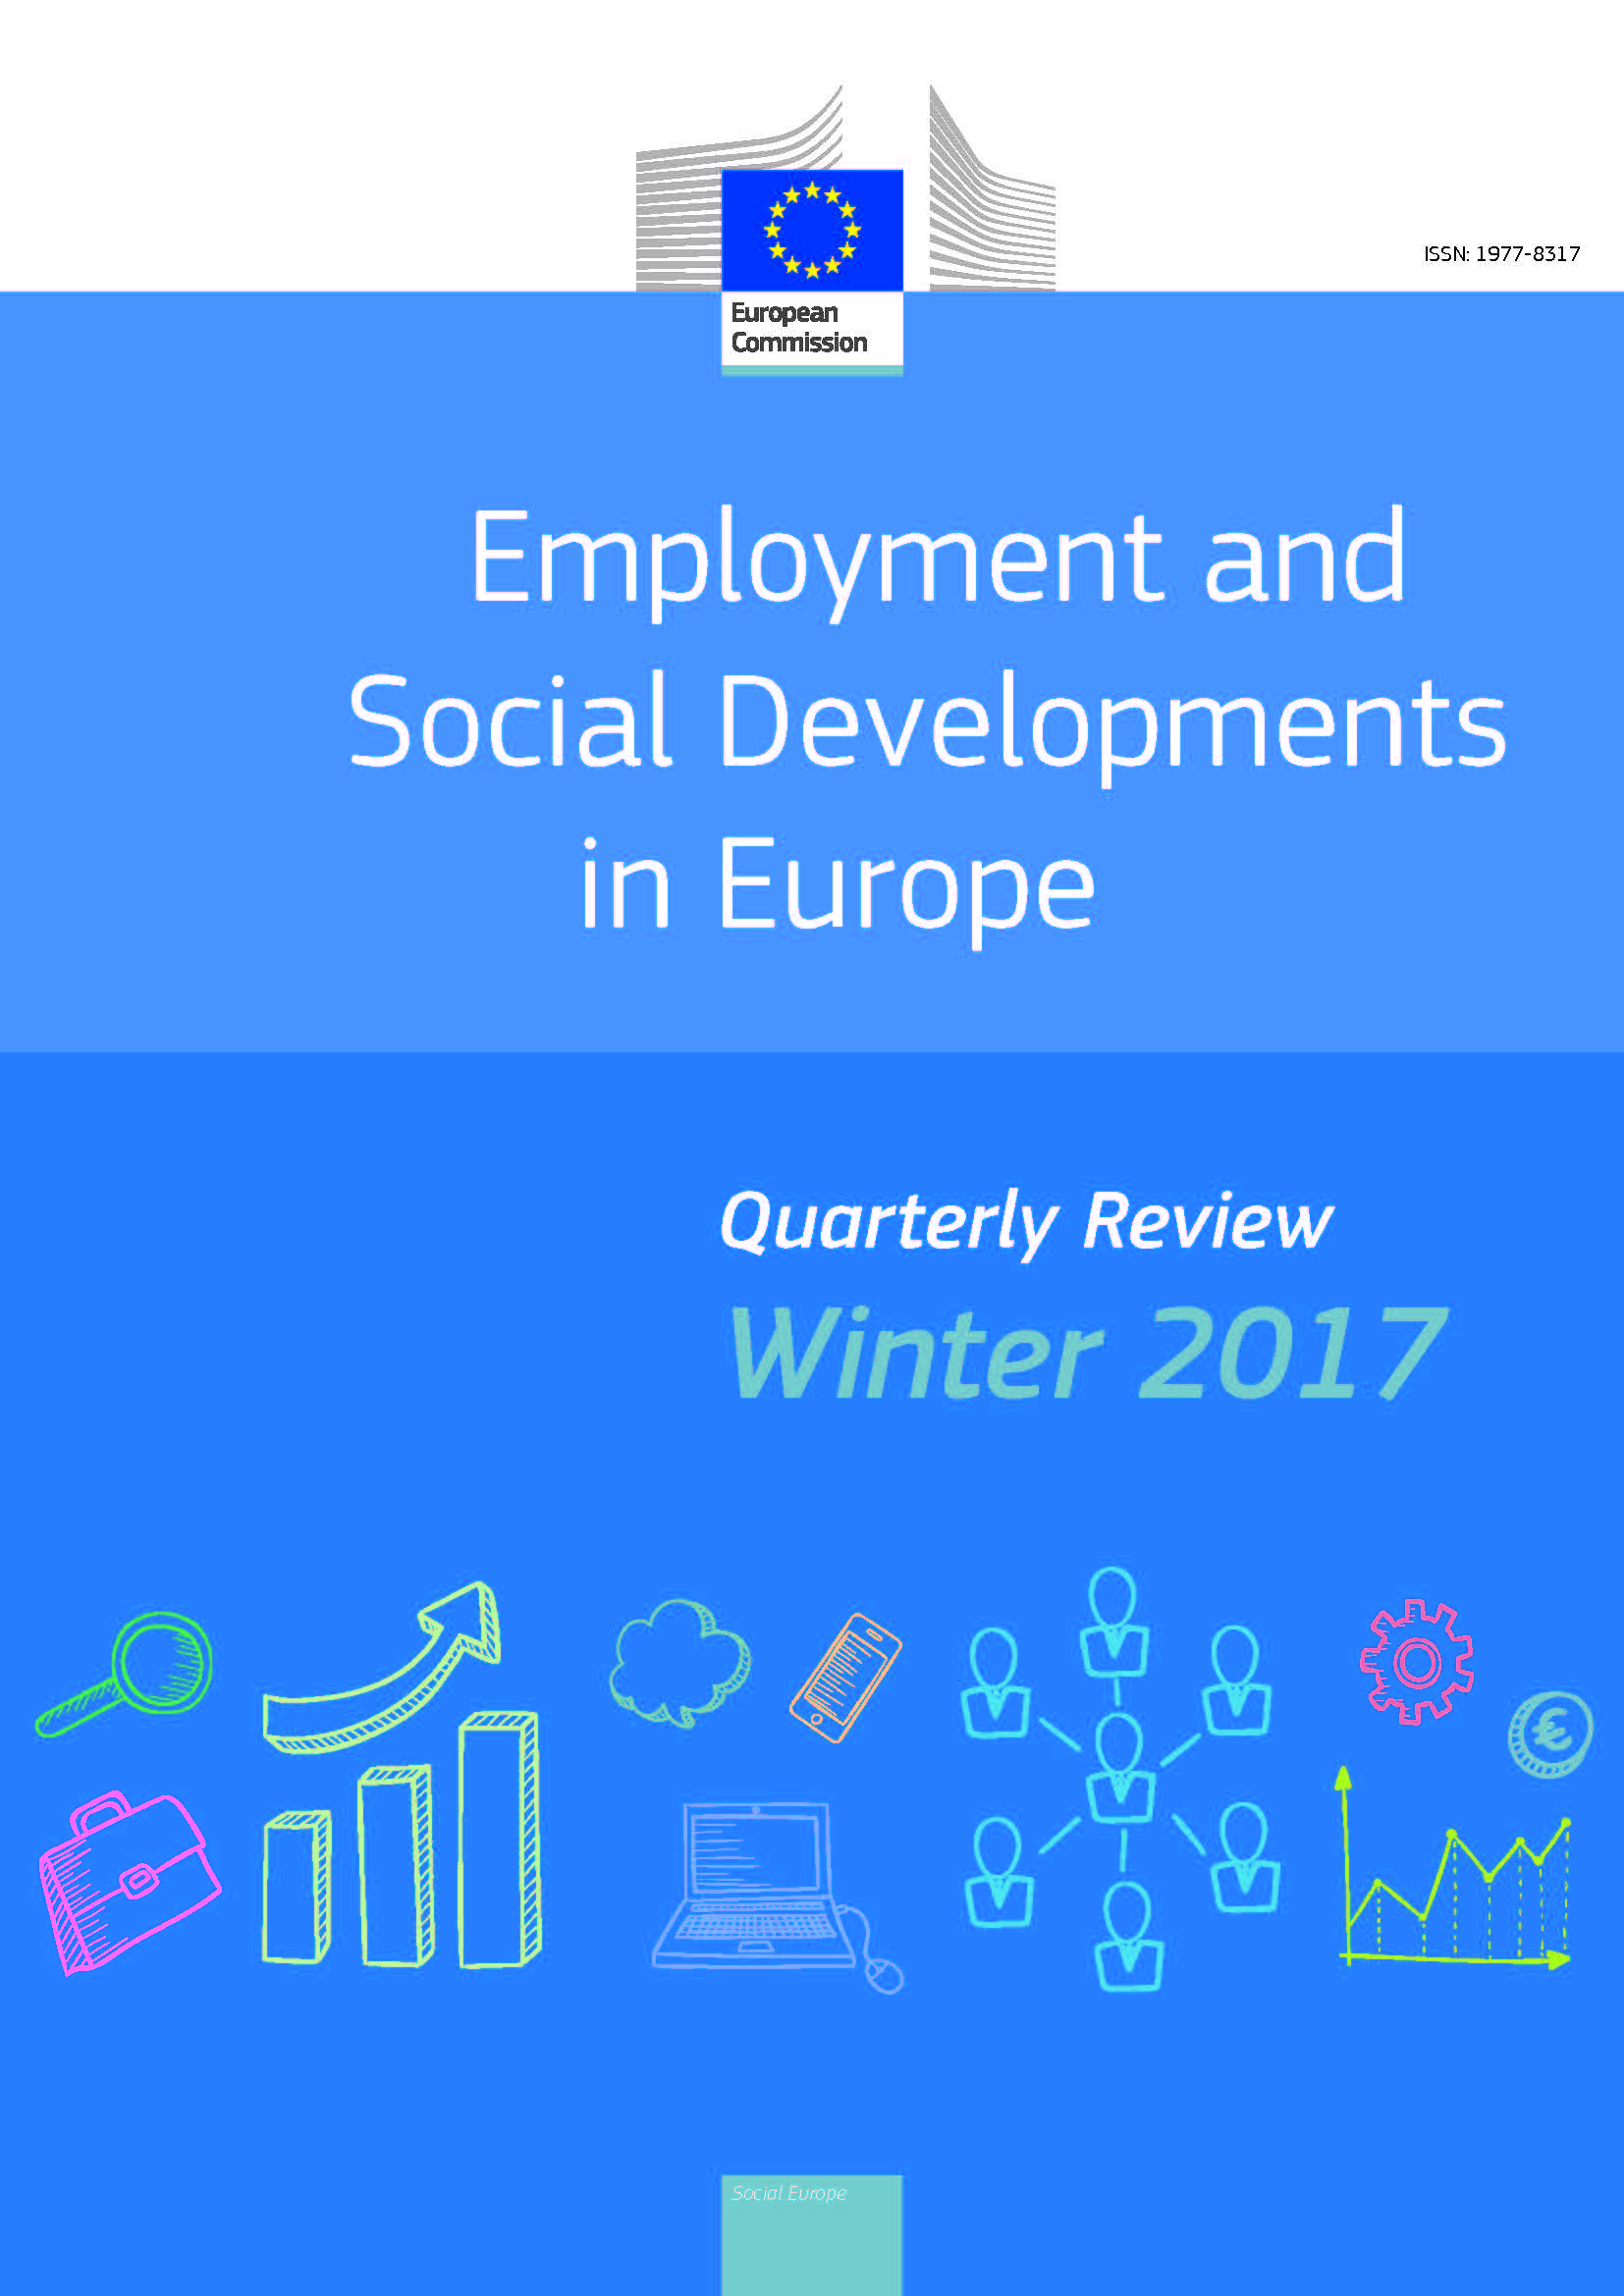 Employment and Social Development in Europe - Quarterly Review - Winter 2017